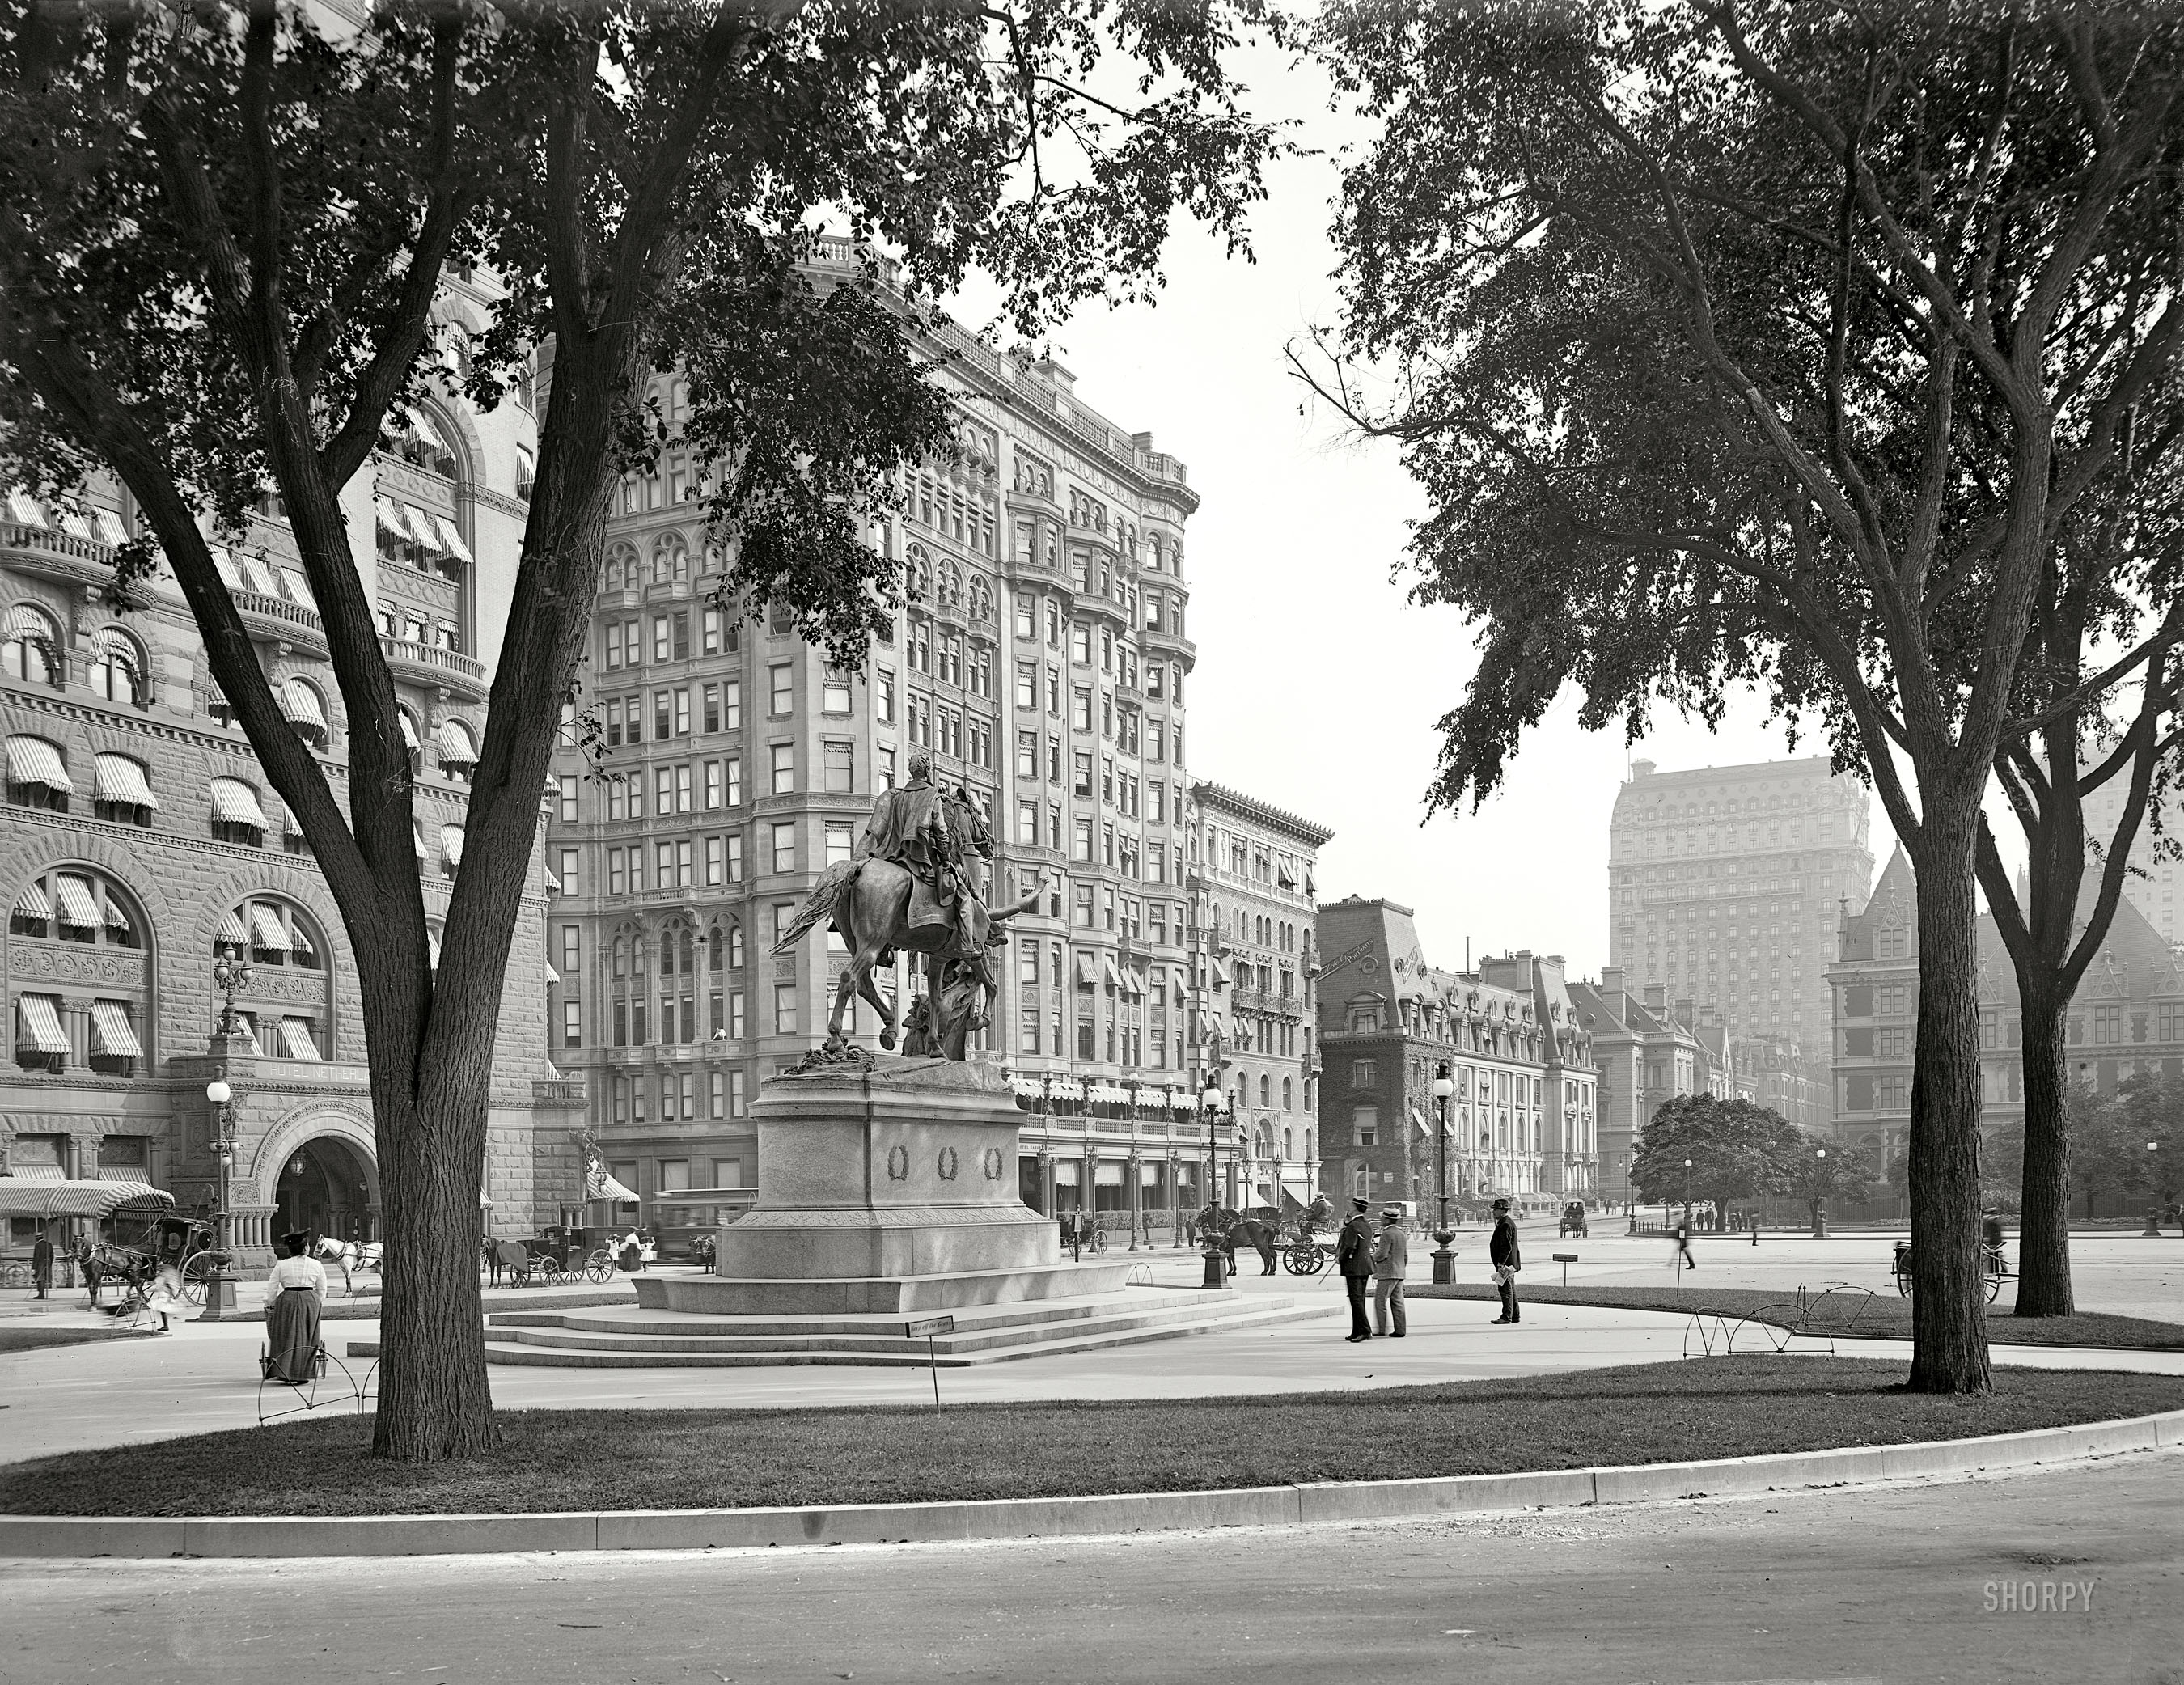 New York circa 1904. "Gen. Sherman statue at Fifth Avenue and 59th Street. Hotels Netherland, Savoy and St. Regis." 8x10 glass negative. View full size.